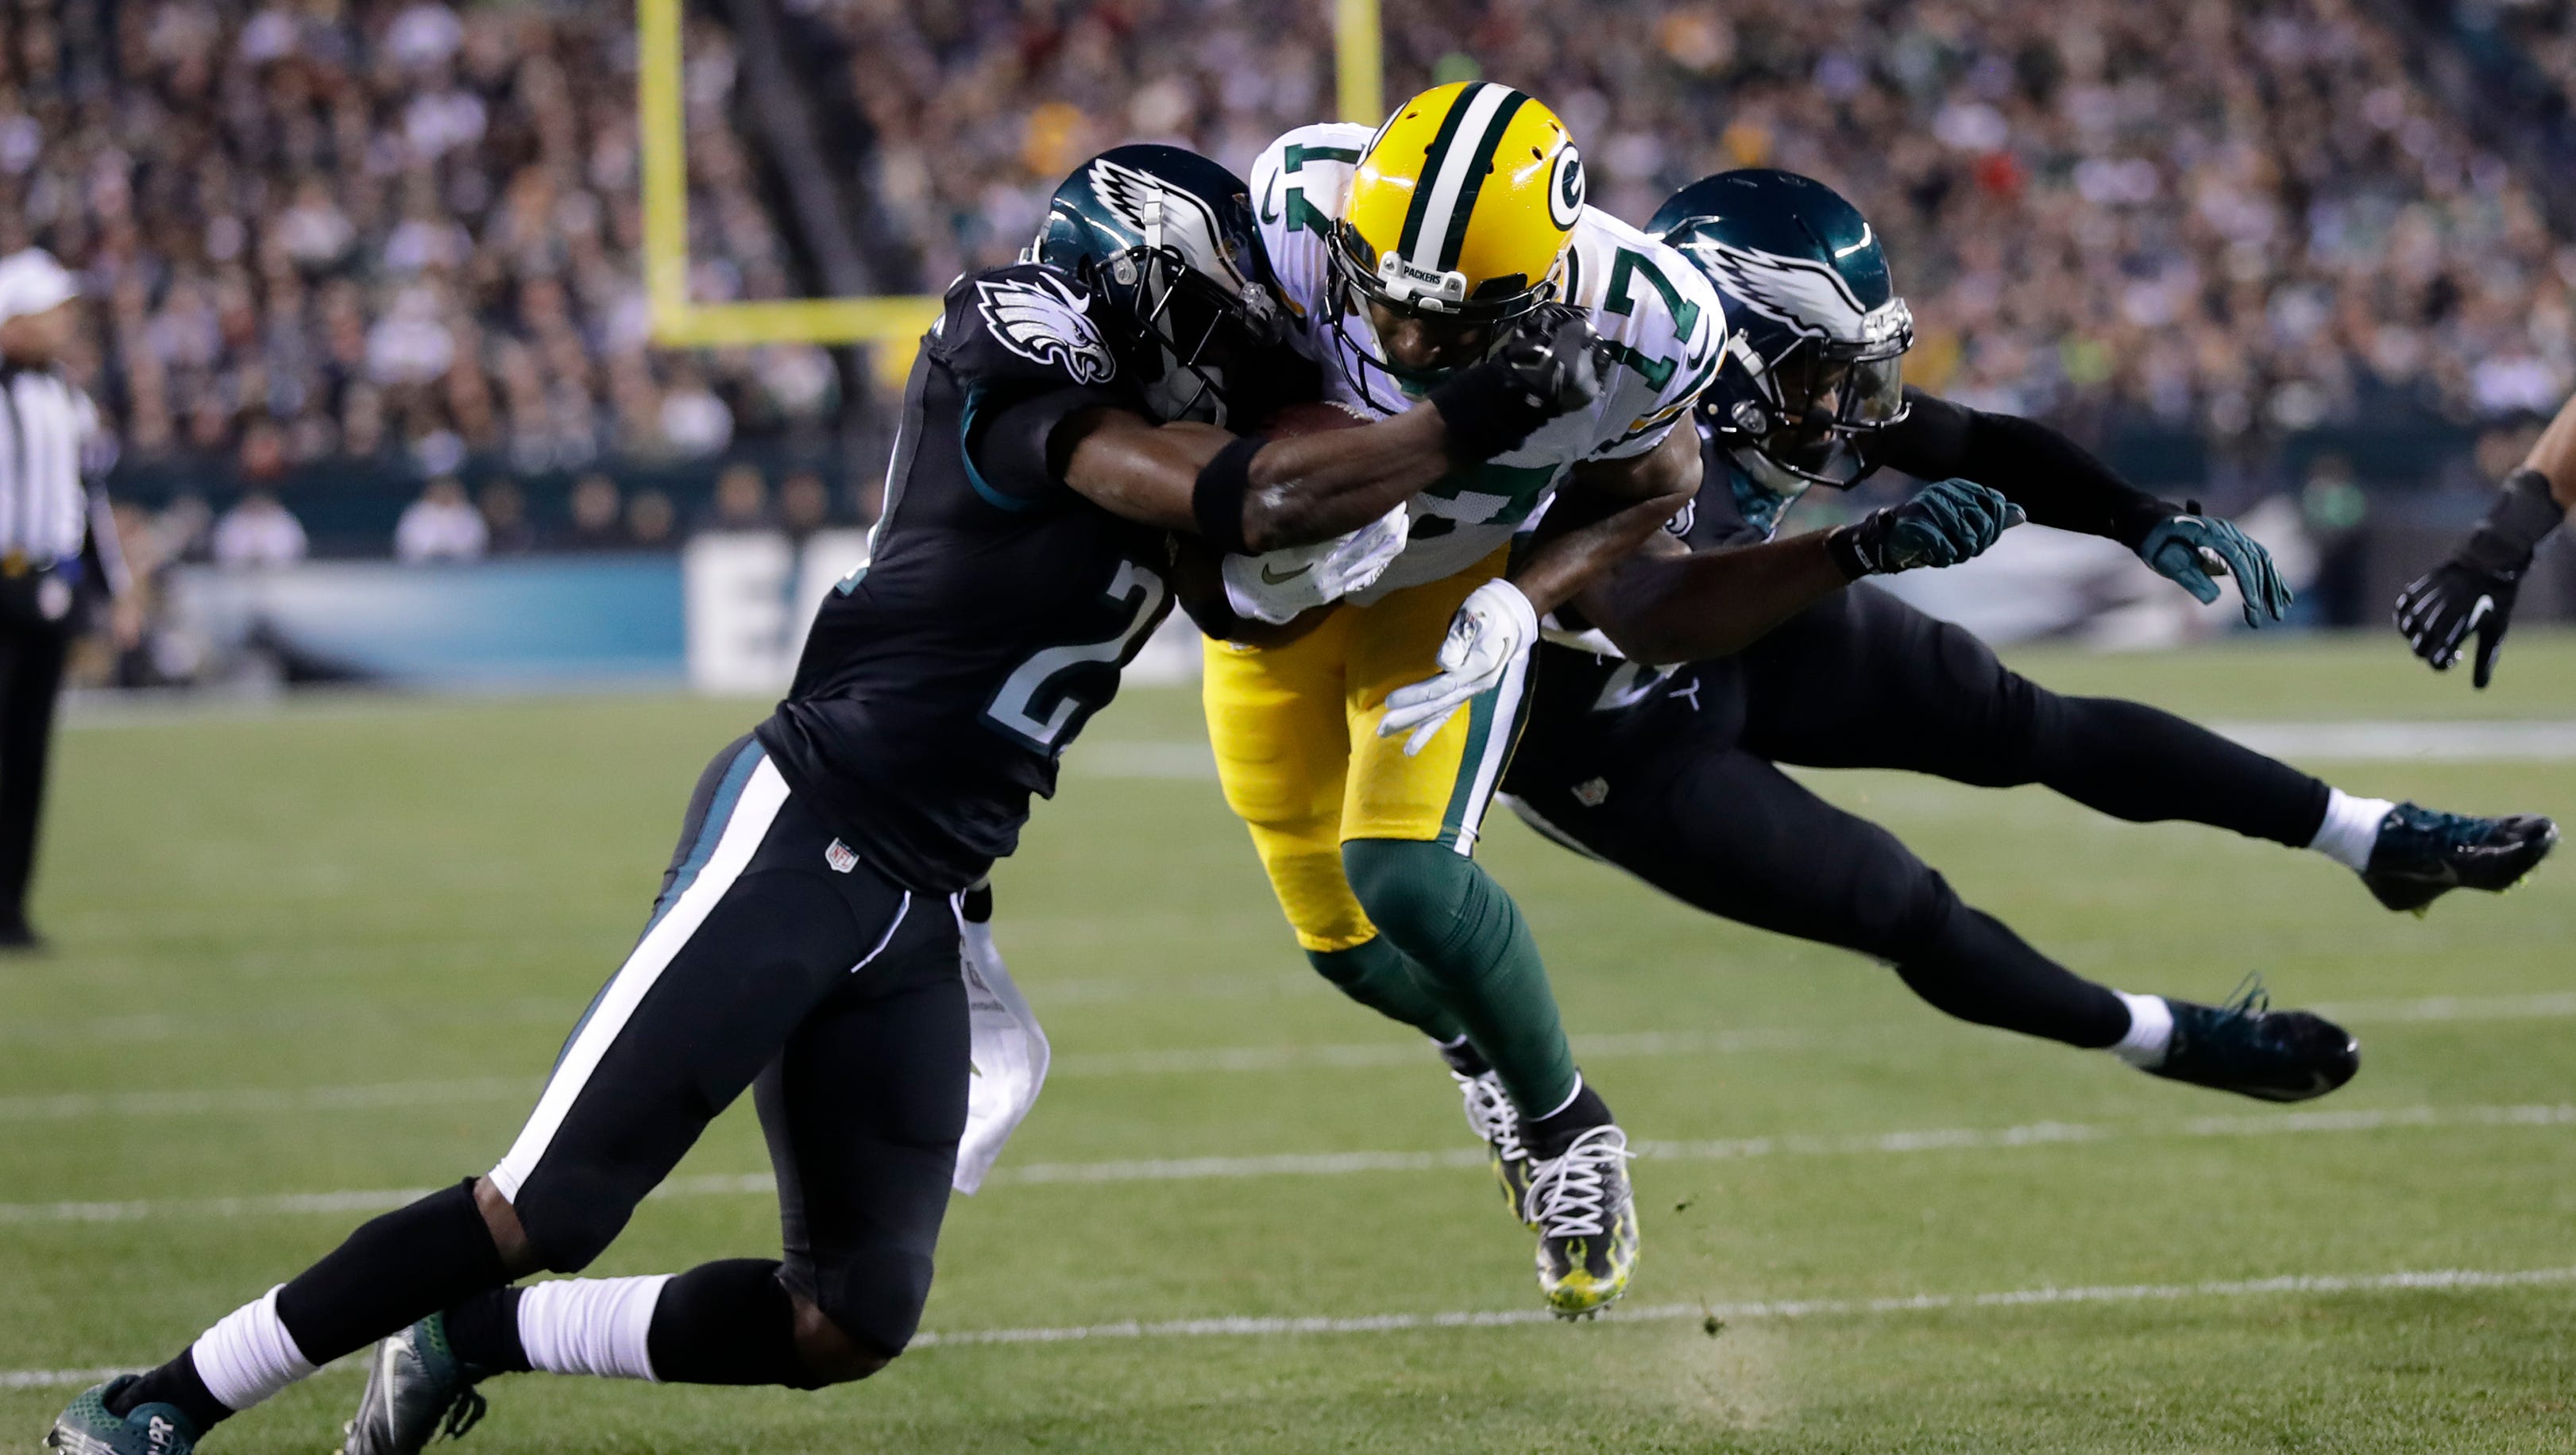 Green Bay Packers' Davante Adams scores a first quarter touchdown against Philadelphia Eagles' Leodis McKelvin and Rodney McLeod.

The Green Bay Packers play against the Philadelphia Eagles Monday, November 28, 2016, at Lincoln Financial Field in Philadelphia, Pa.